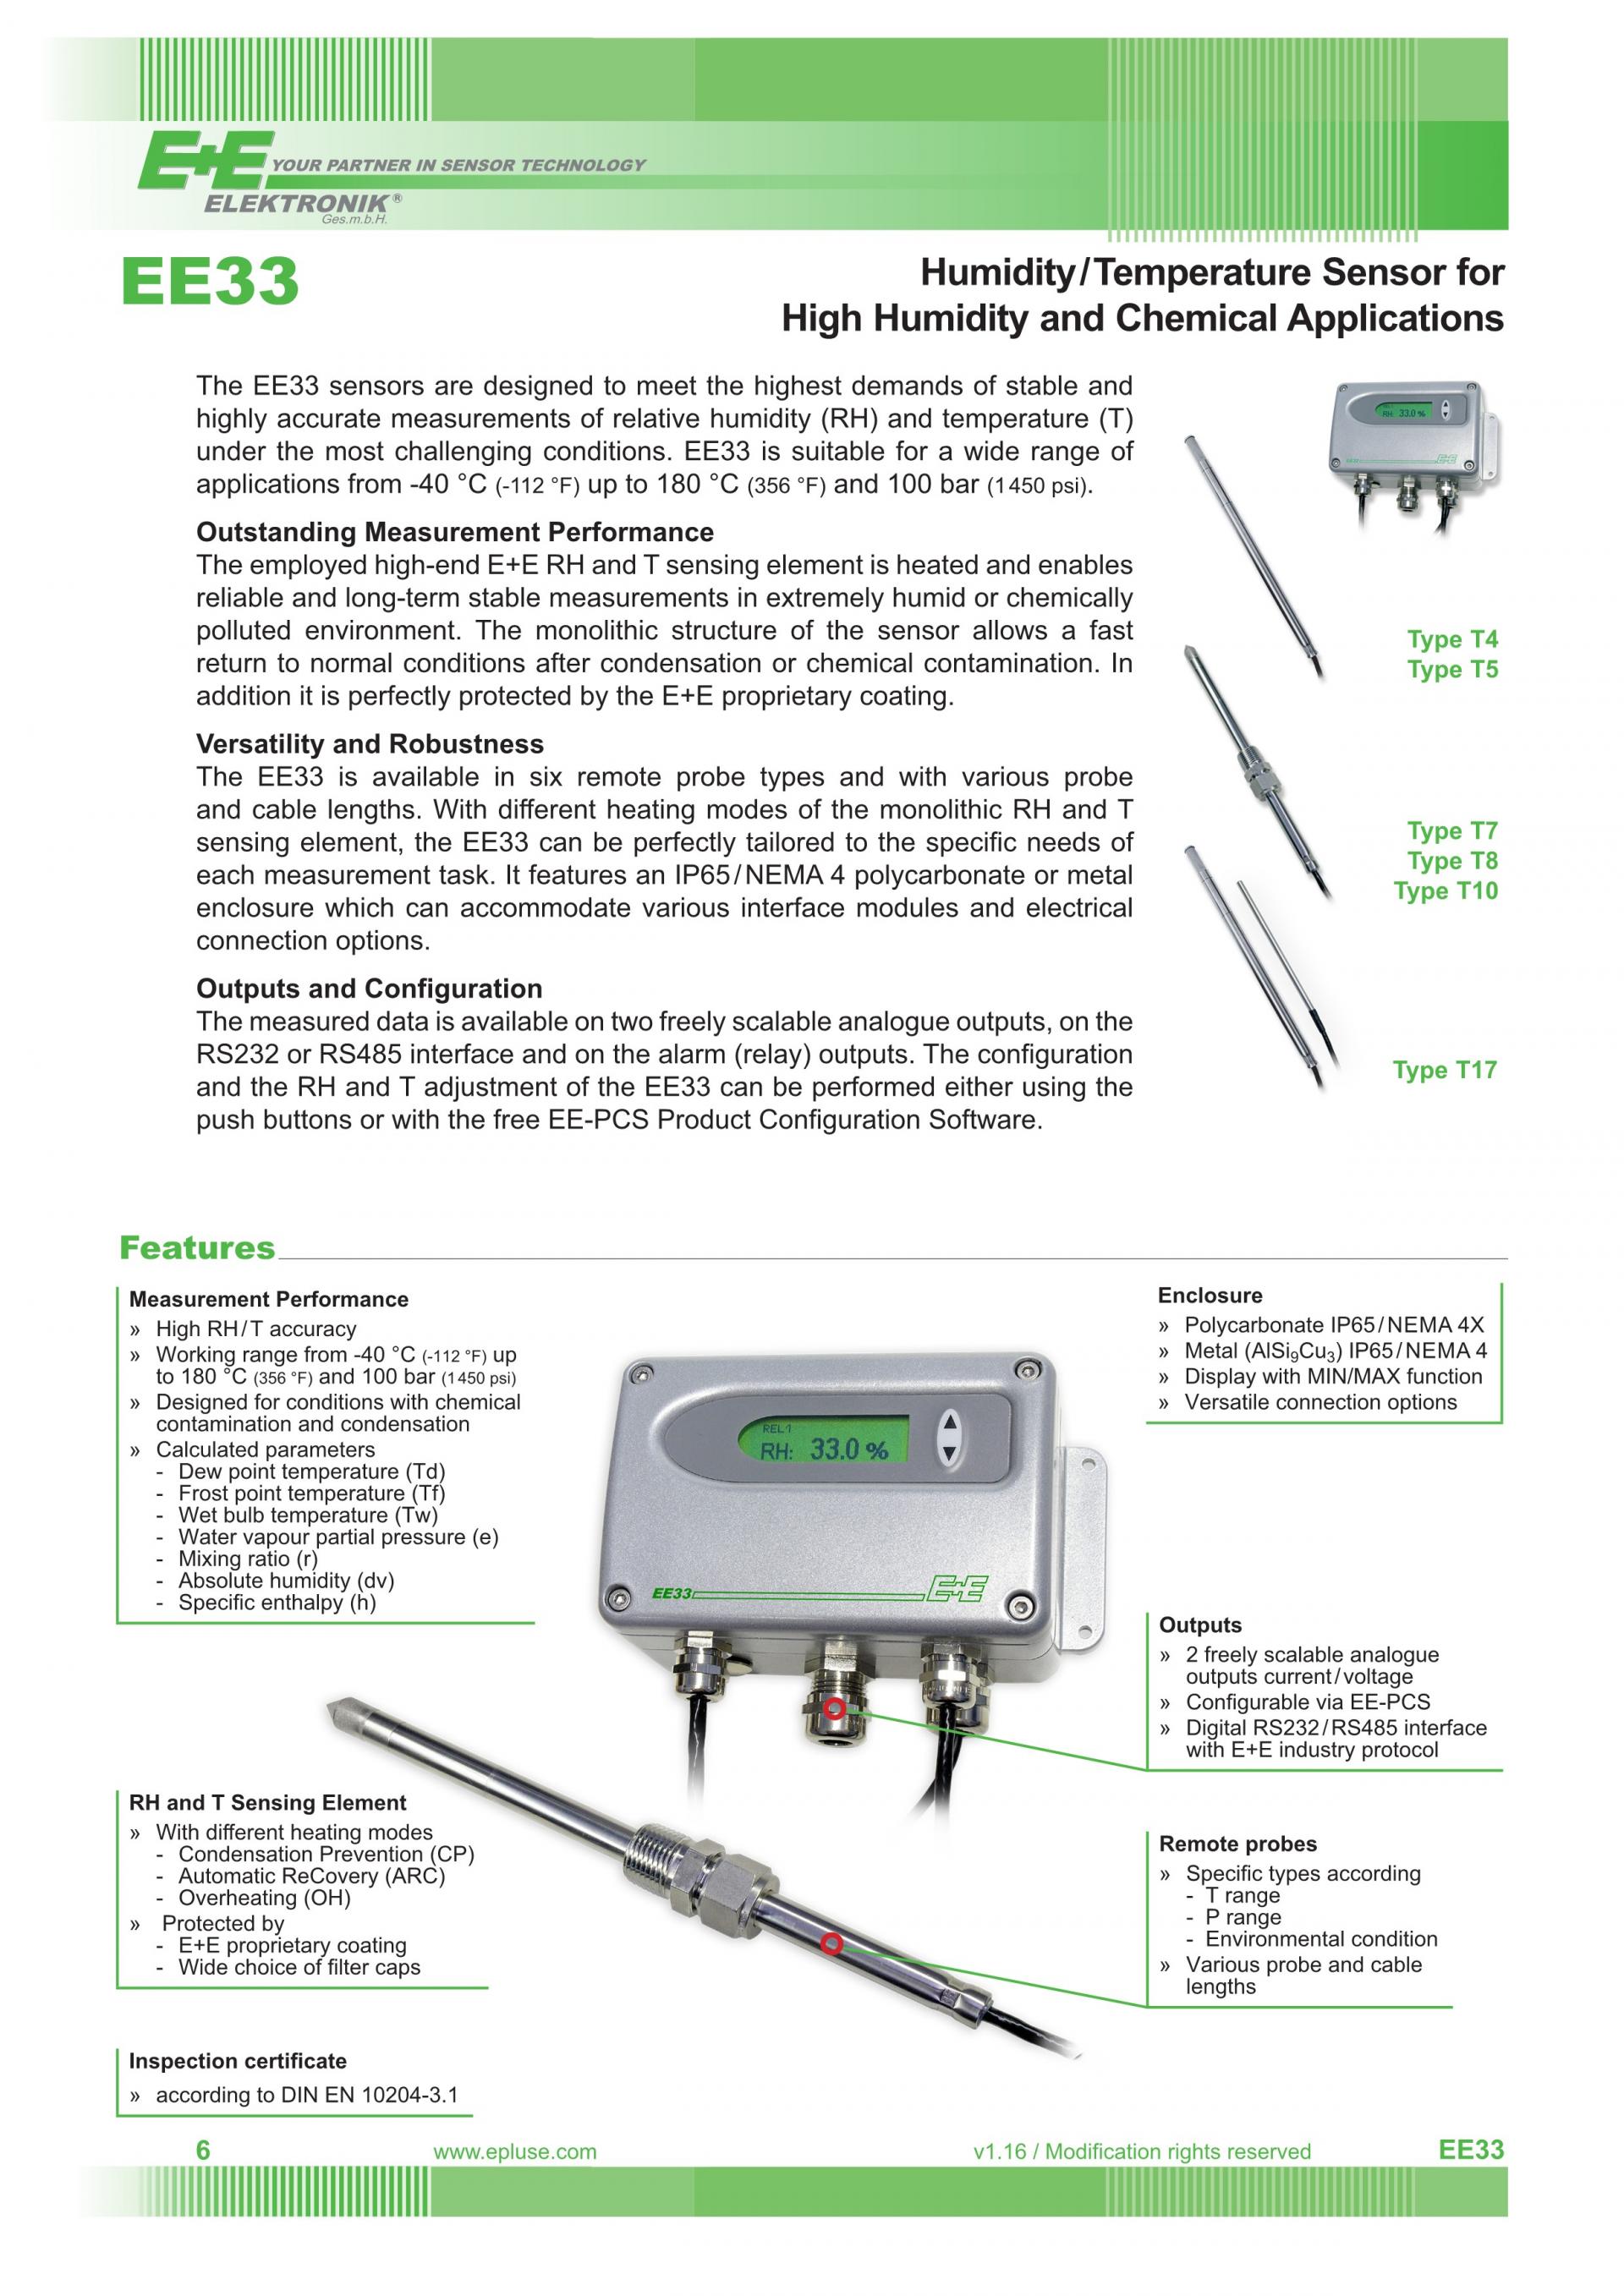 EE33 Humidity and Temperature Transmitter